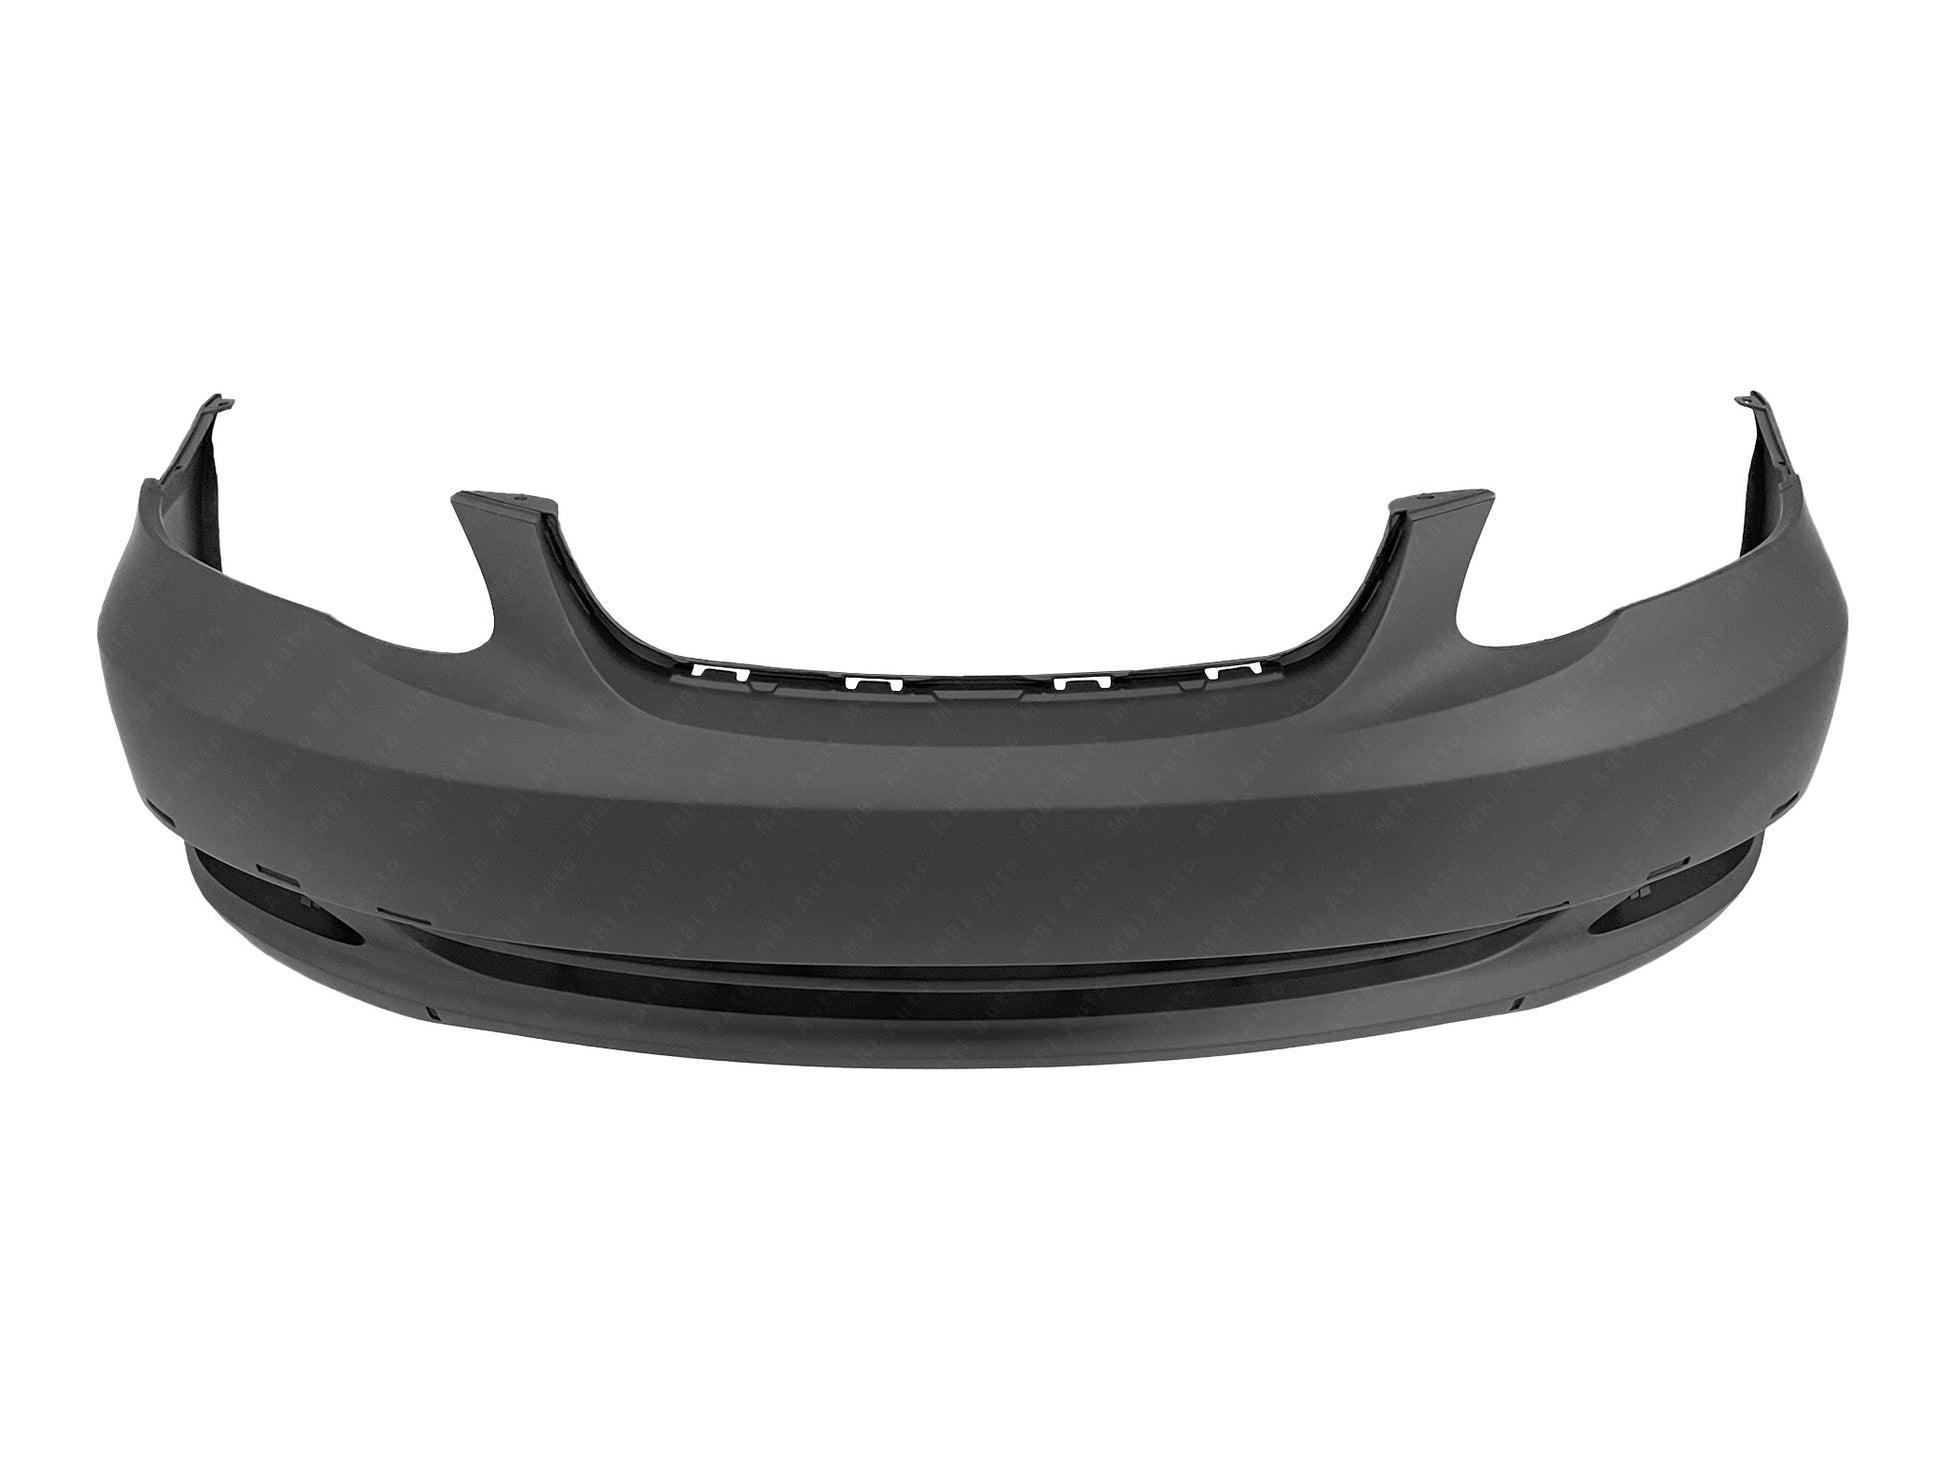 Toyota Corolla 2005 - 2008 Front Bumper Cover 05 - 08 TO1000298 Bumper-King